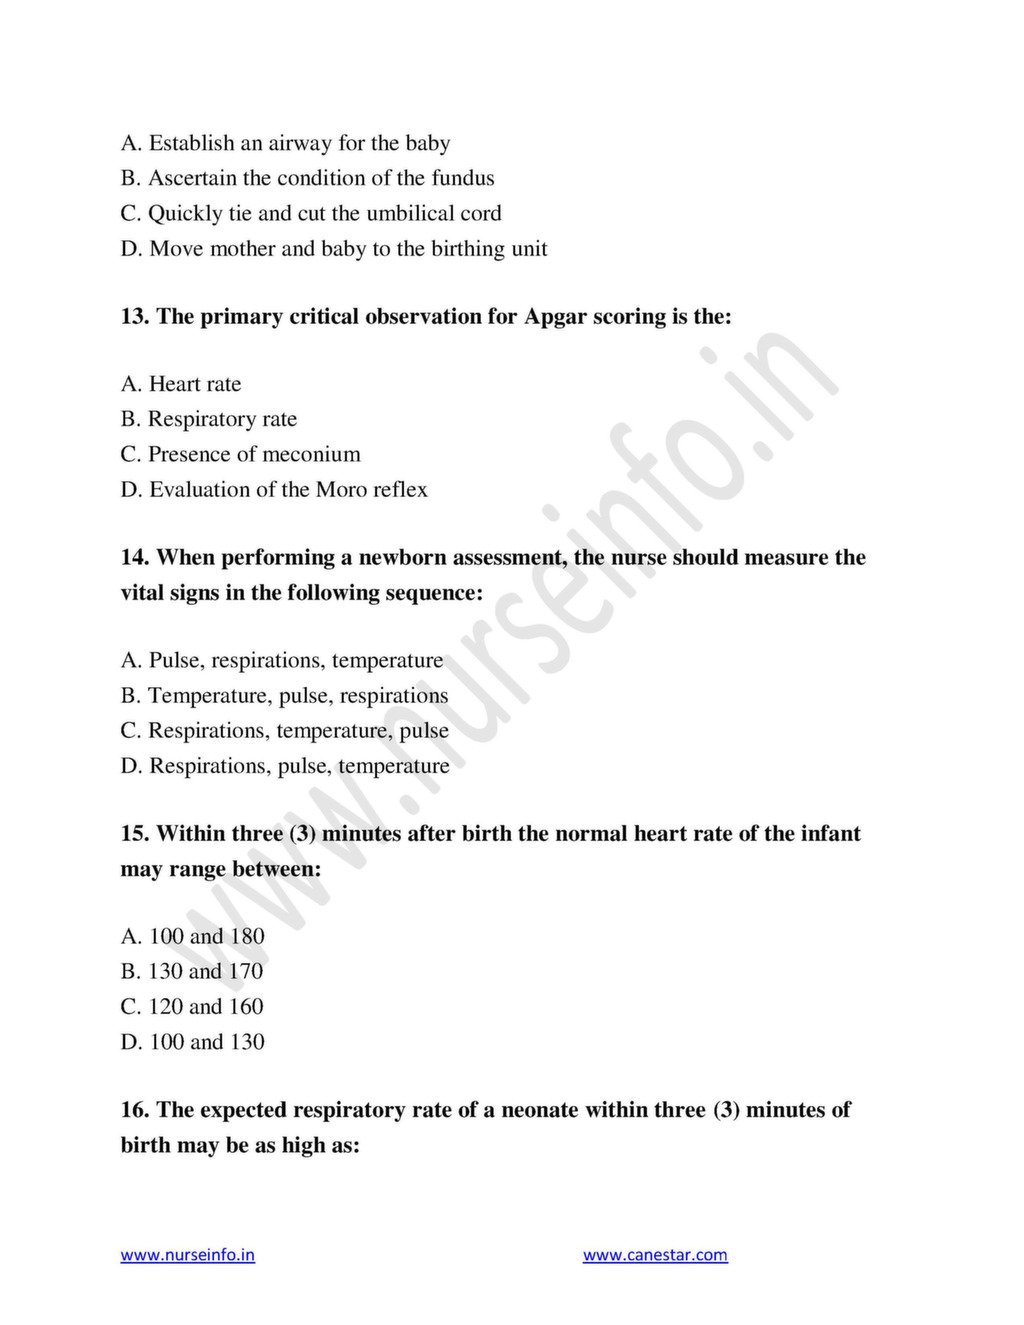 NCLEX PRACTICE QUESTION WITH ANSWER (PDF) PEDIATRIC AND MSN nurseinfo